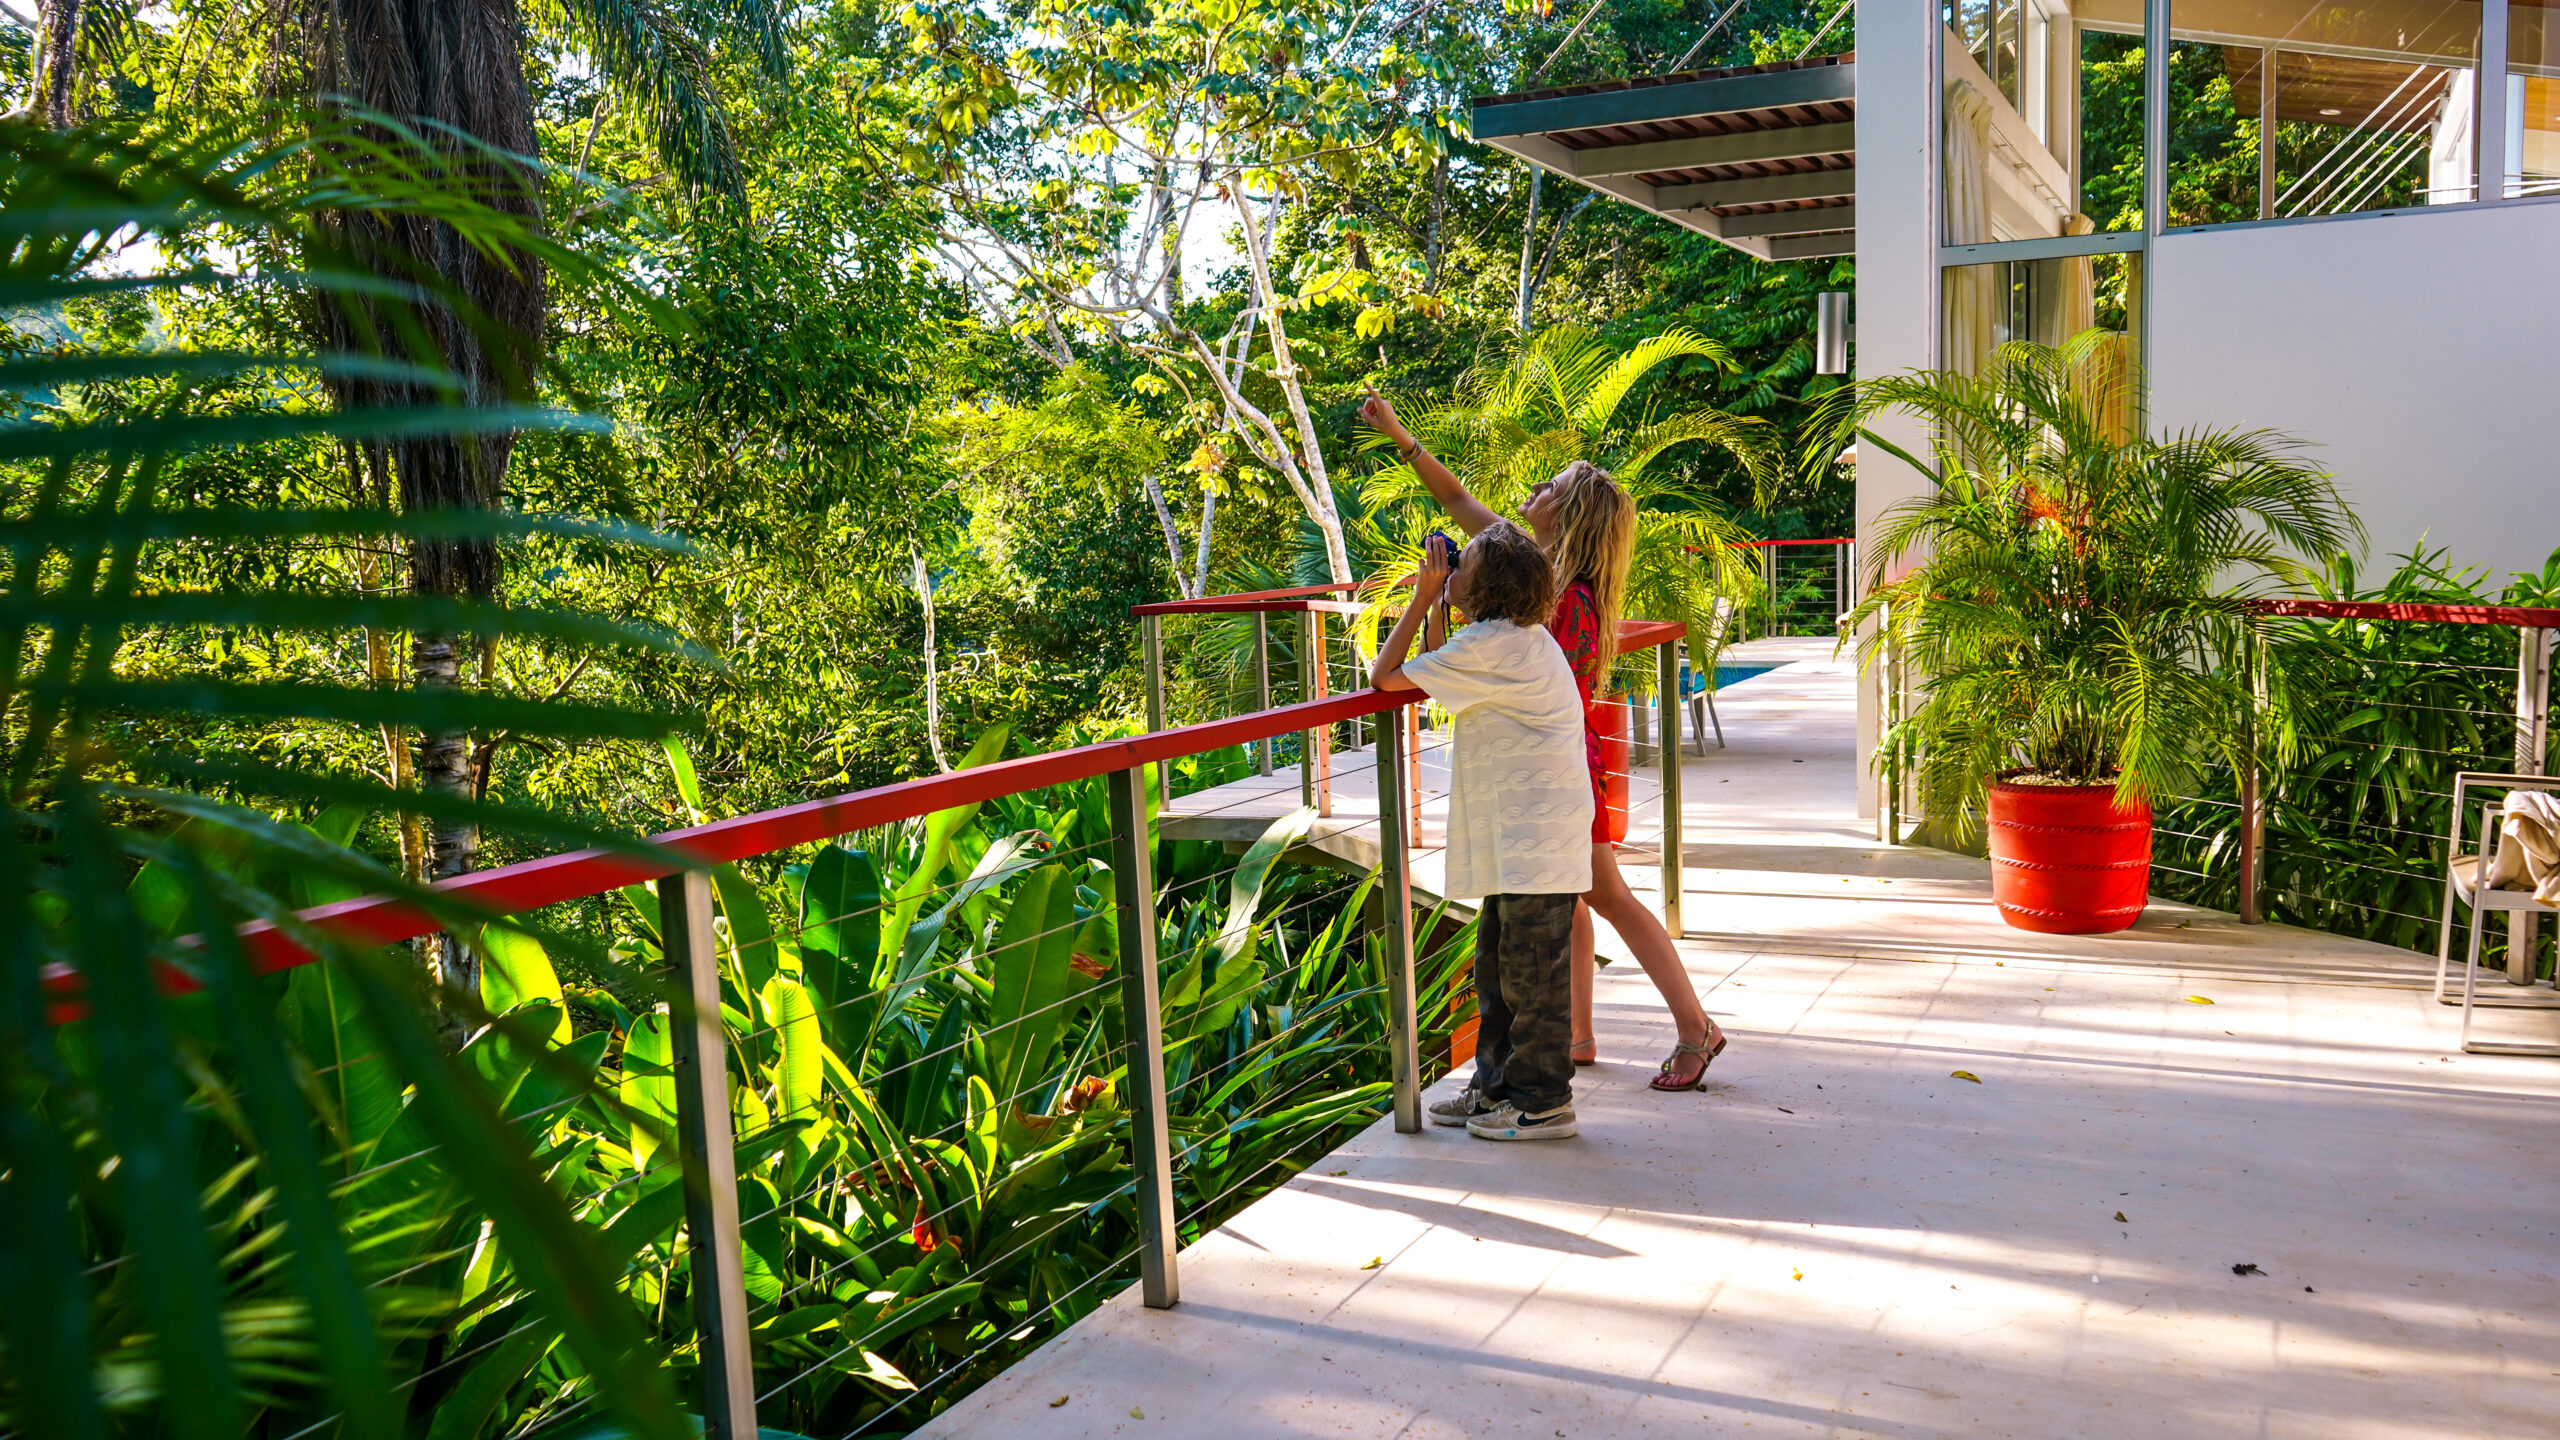 The Breathtaking Belize Jungle Resort Your Family Must Visit